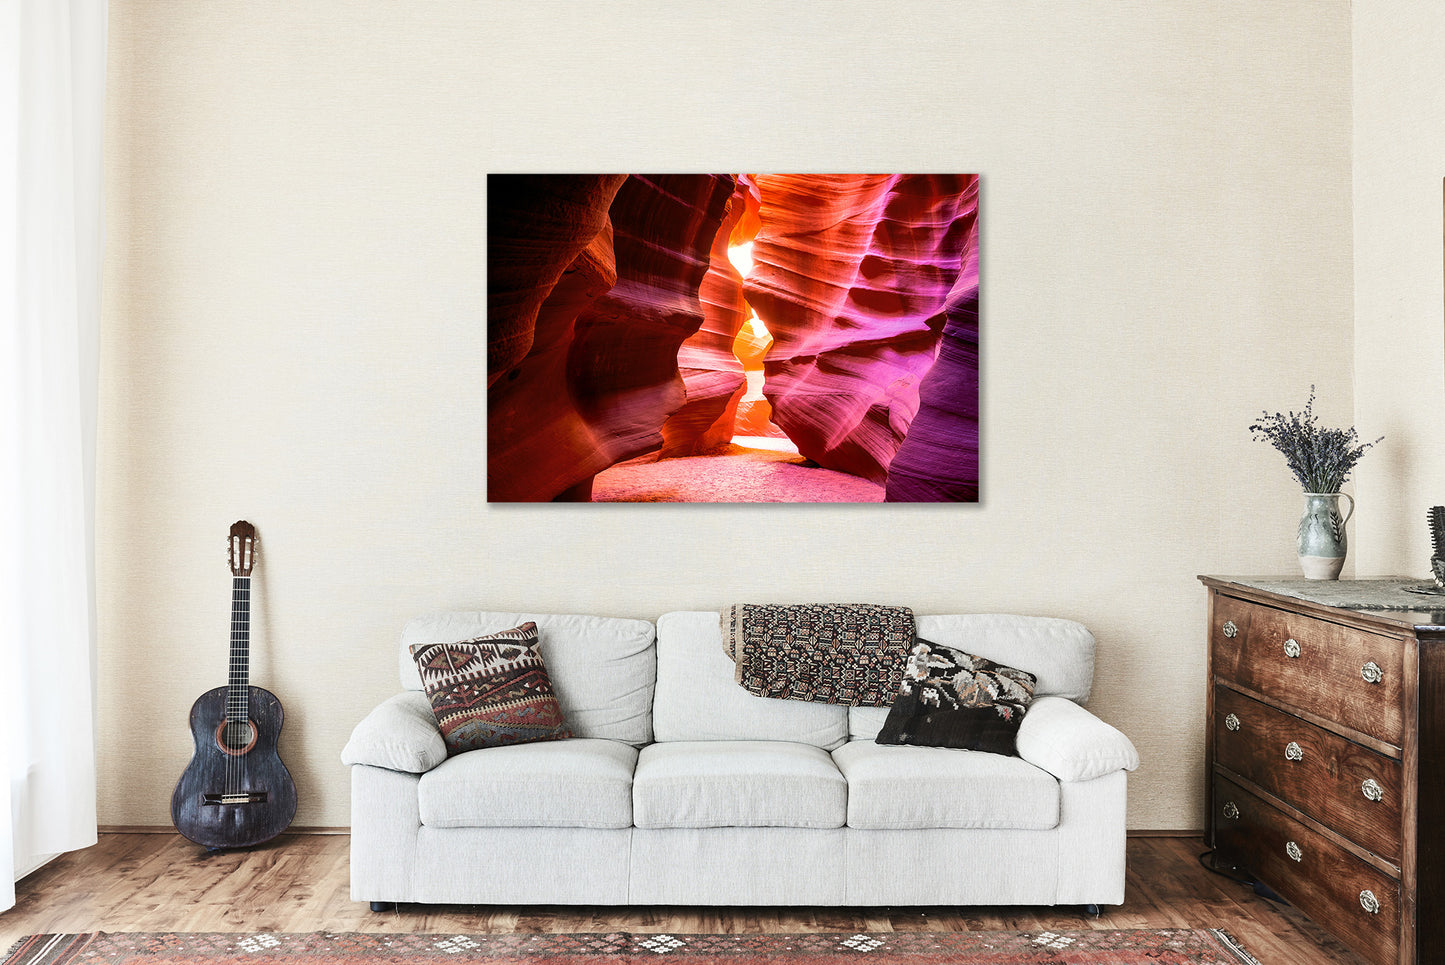 Antelope Canyon Canvas Wall Art (Ready to Hang) Gallery Wrap of Slot Canyon Walls Shaped as Hourglass in Arizona Desert Photography Southwestern Decor